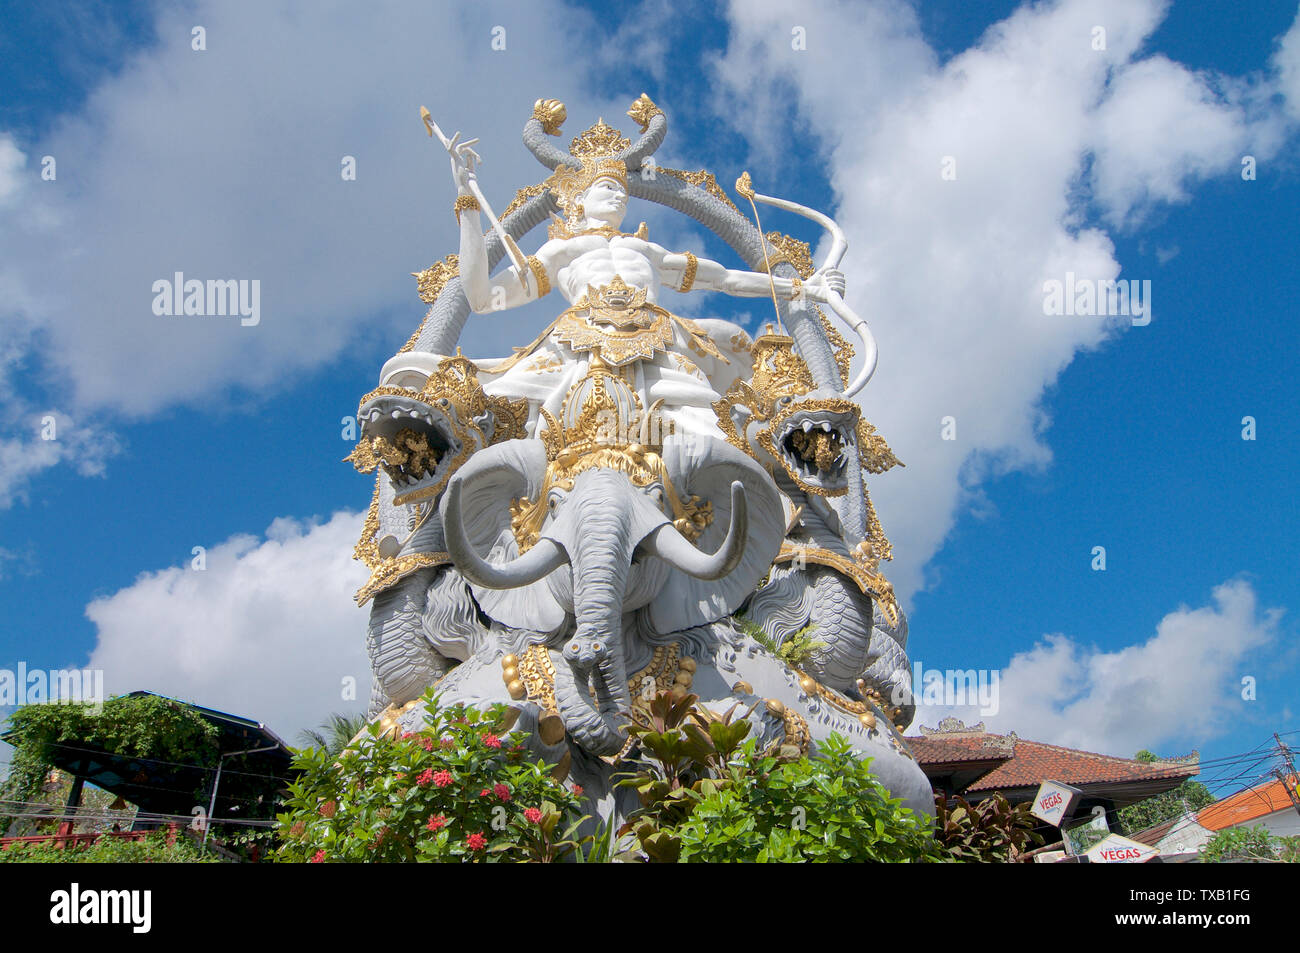 Ubud, Bali, Indonesia - 5th May 2019 : Low angle view on the majestic Arjuna Statue located at the roundabout in Ubud, Bali - Indonesia Stock Photo